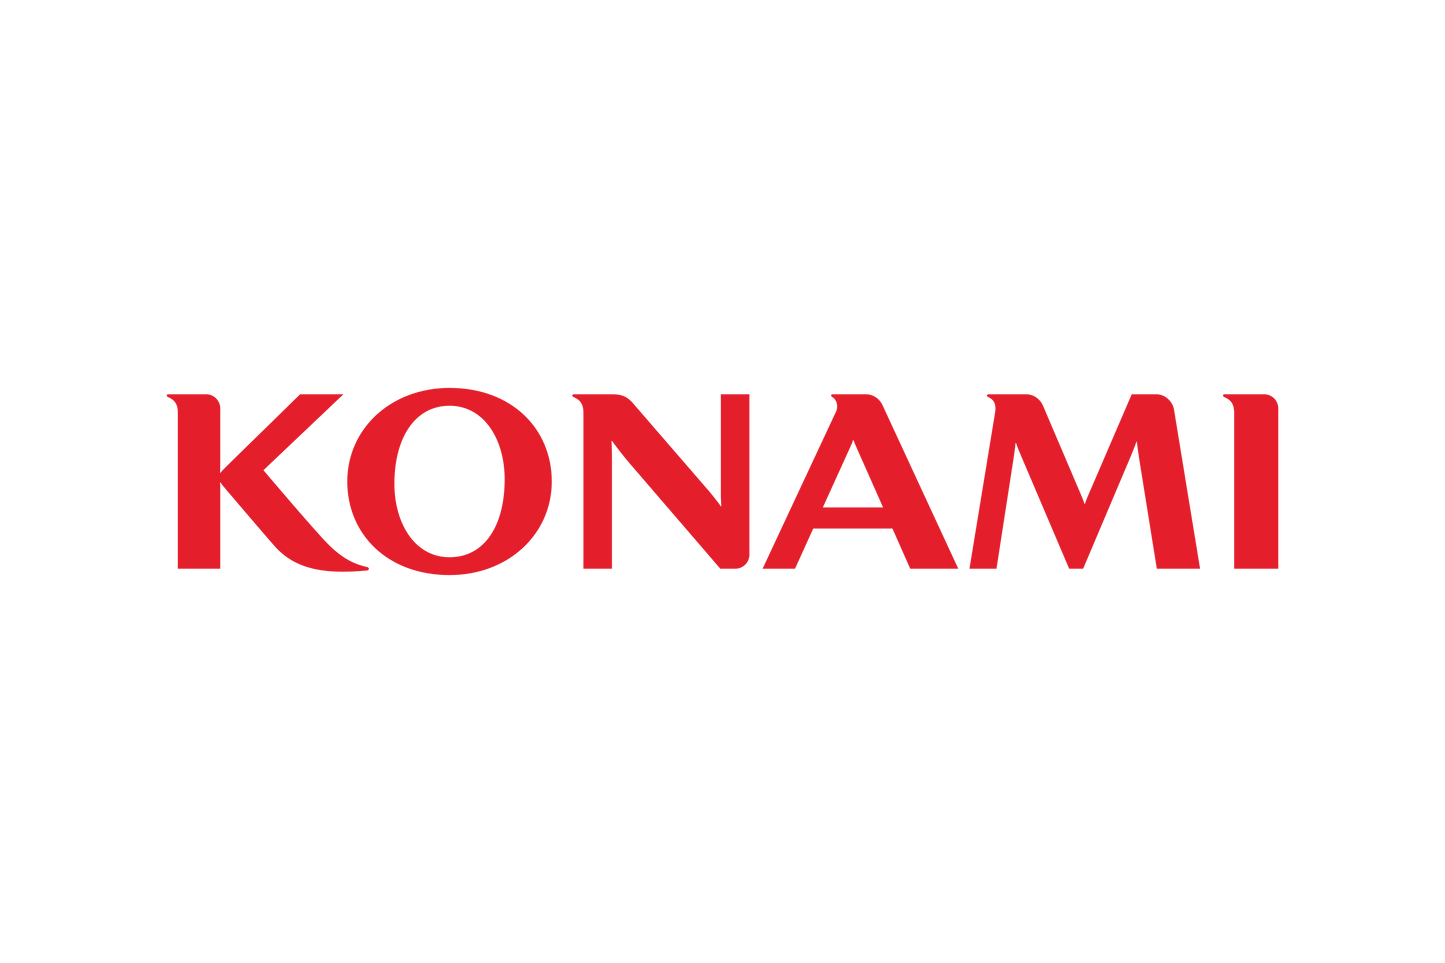 Konami's distinctive logo, representing a legendary presence in the gaming industry and home to the beloved Yu-Gi-Oh! trading card game, available at Generation Strange.